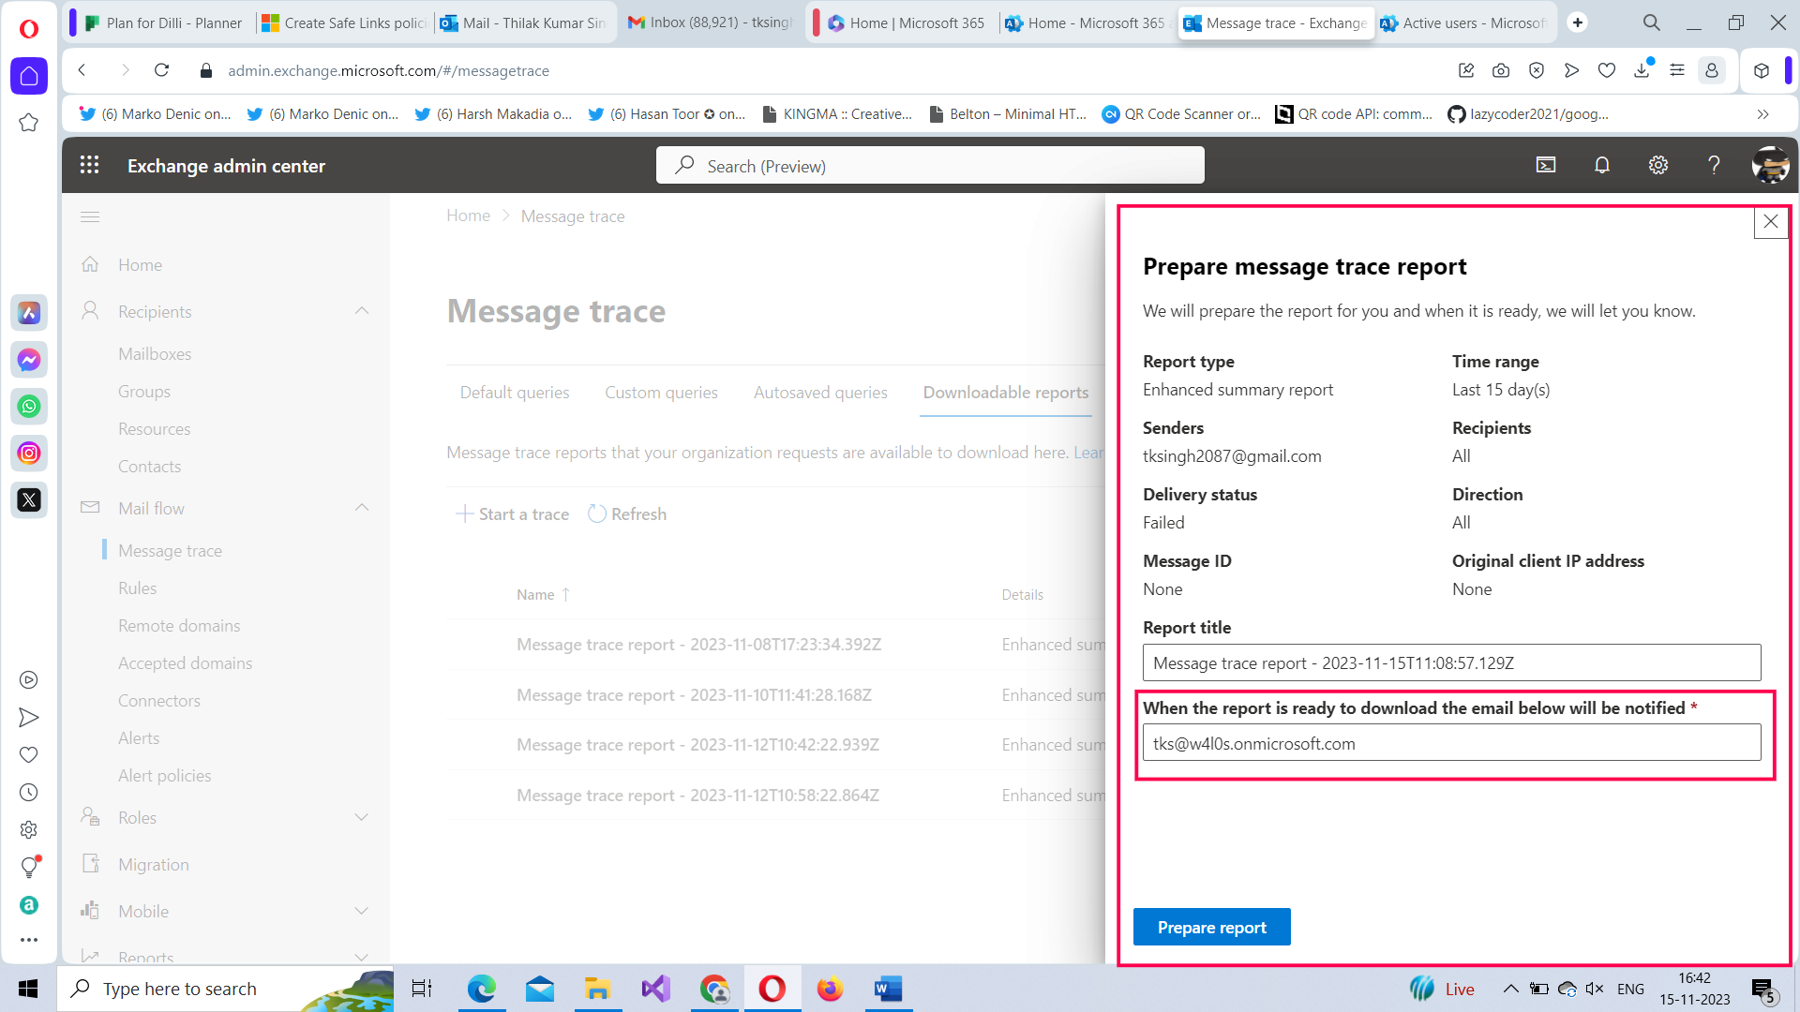 This screenshot shows preparing the message trace report to be mailed once it is ready.